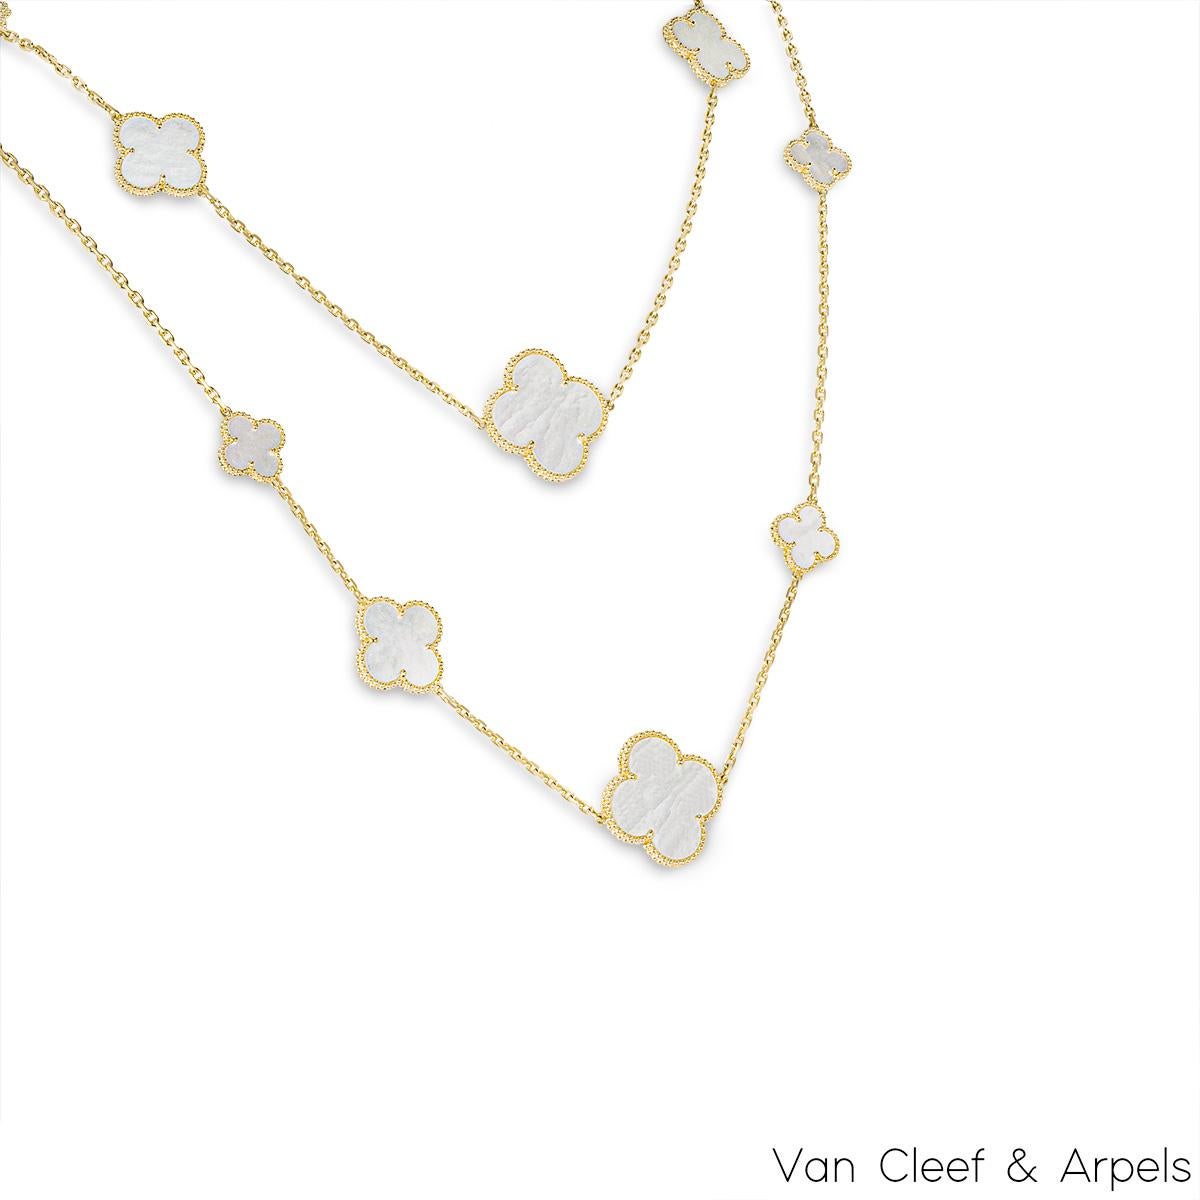 A gorgeous 18k yellow gold Van Cleef & Arpels necklace from the Magic Alhambra collection. The necklace comprises of 16 iconic 4 leaf clover motifs alternating in size, set with mother of pearl inlays and complemented by a beaded outer edge. The